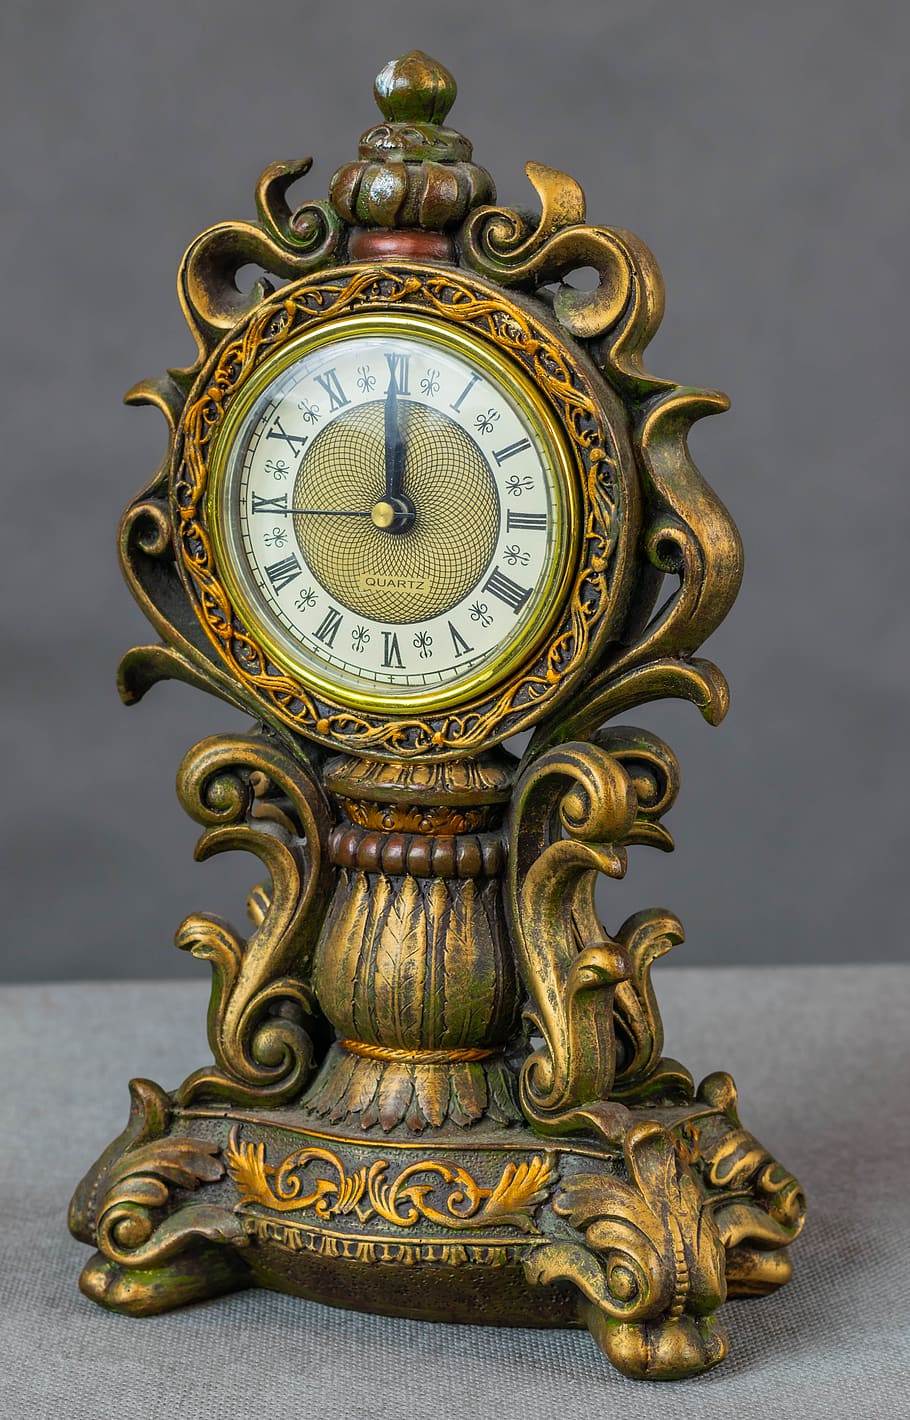 antique, clock, hours, old, watch, minutes, indoors, art and craft, metal, gold colored